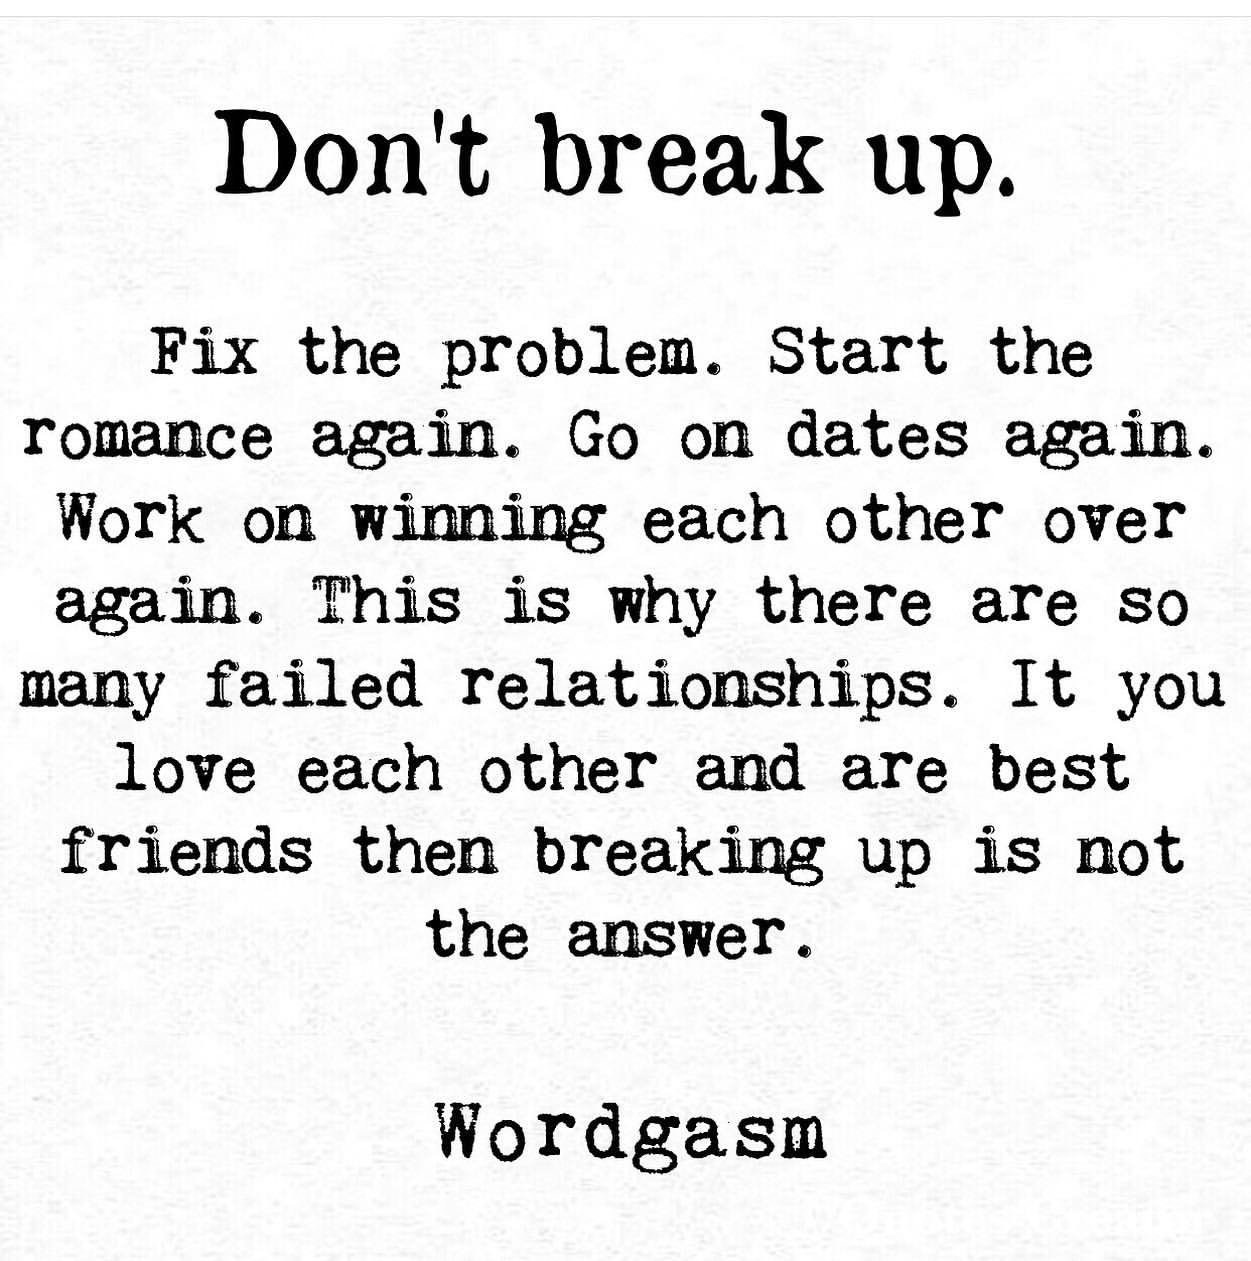 Don't break up. Fix the problem. Start the romance again. Go on dates again. Work on winning each other over again. This is why there are so many failed relationships. It you love each other and are best friends then breaking up is not the answer.